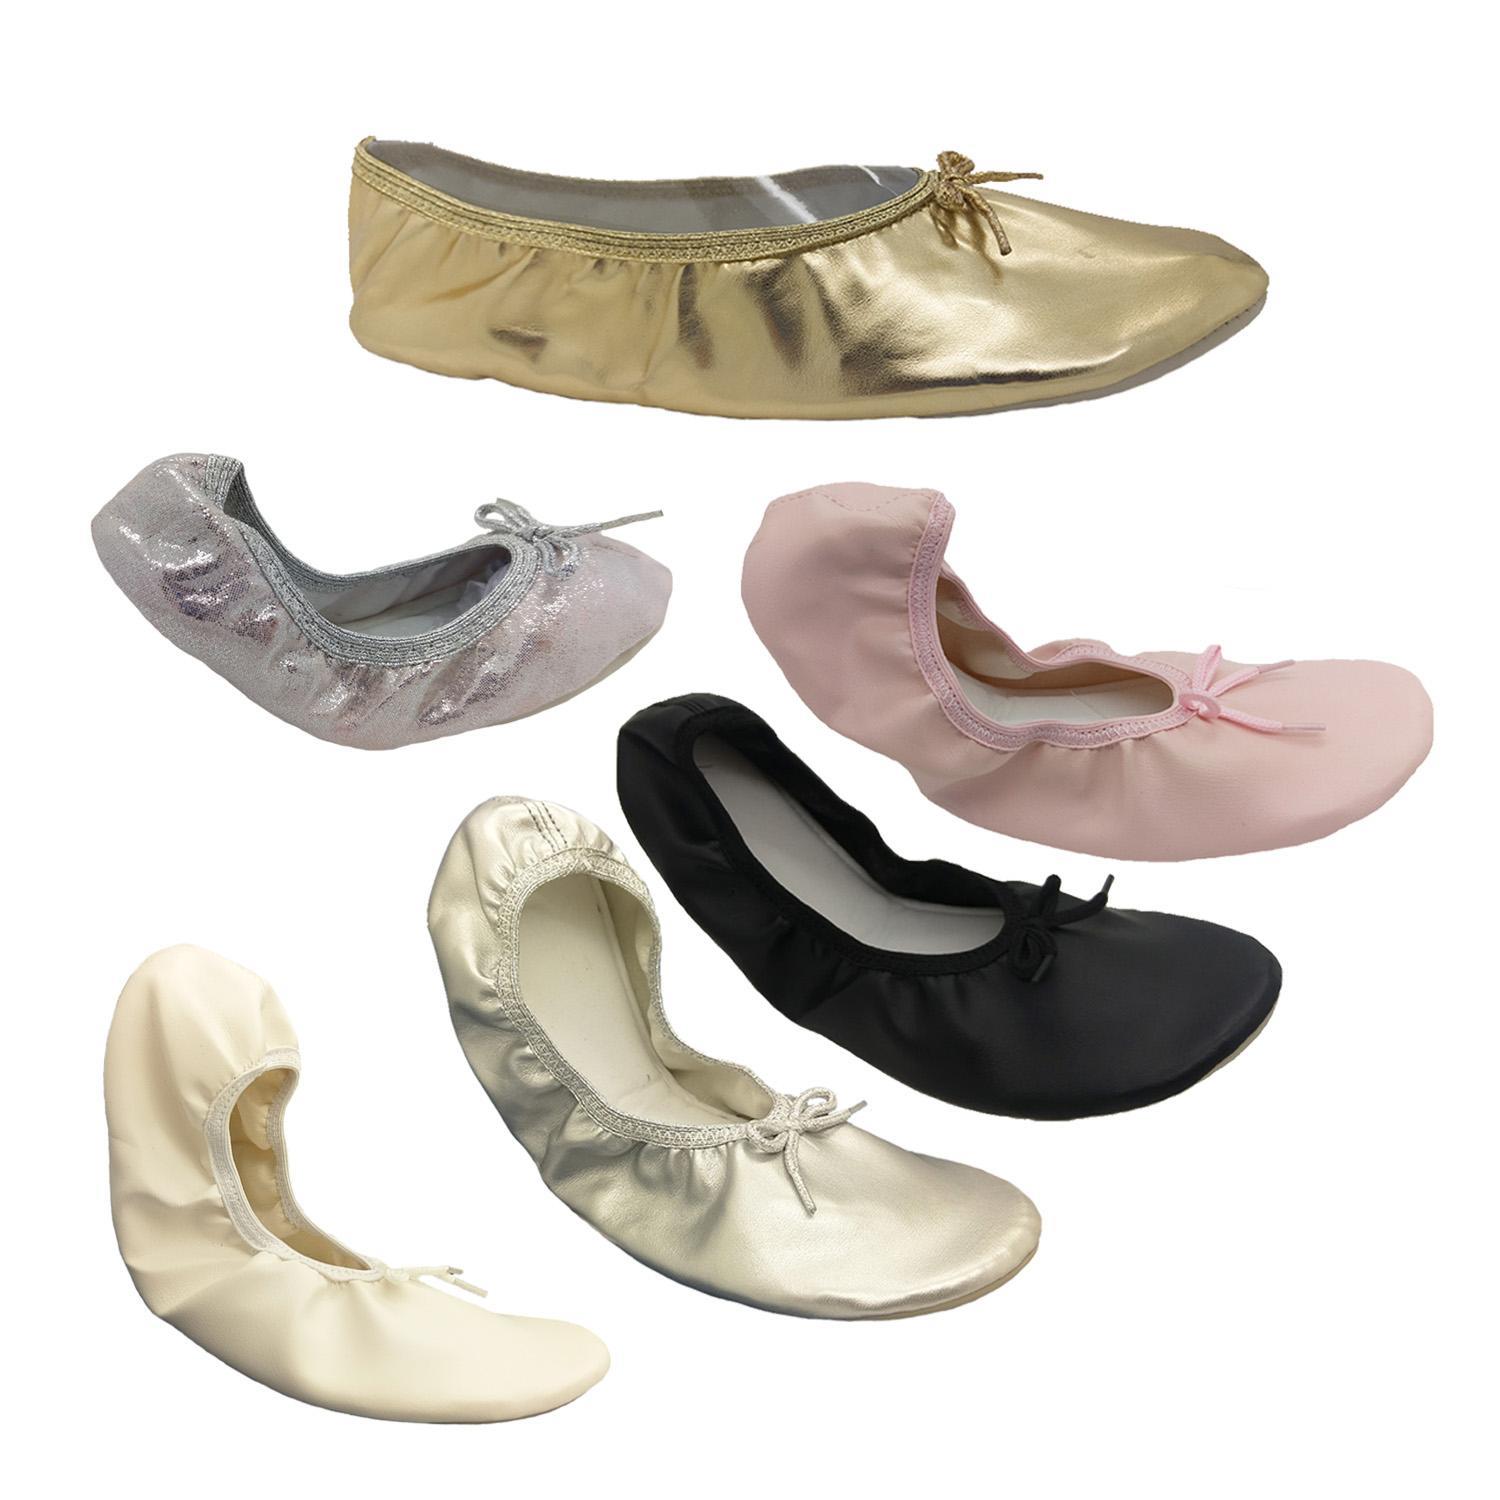 Girls Genuine Jiffies Classic Ballet Flats Elastic Edge Soft Insole Size 5 - 3-Silver Distressed-5-6